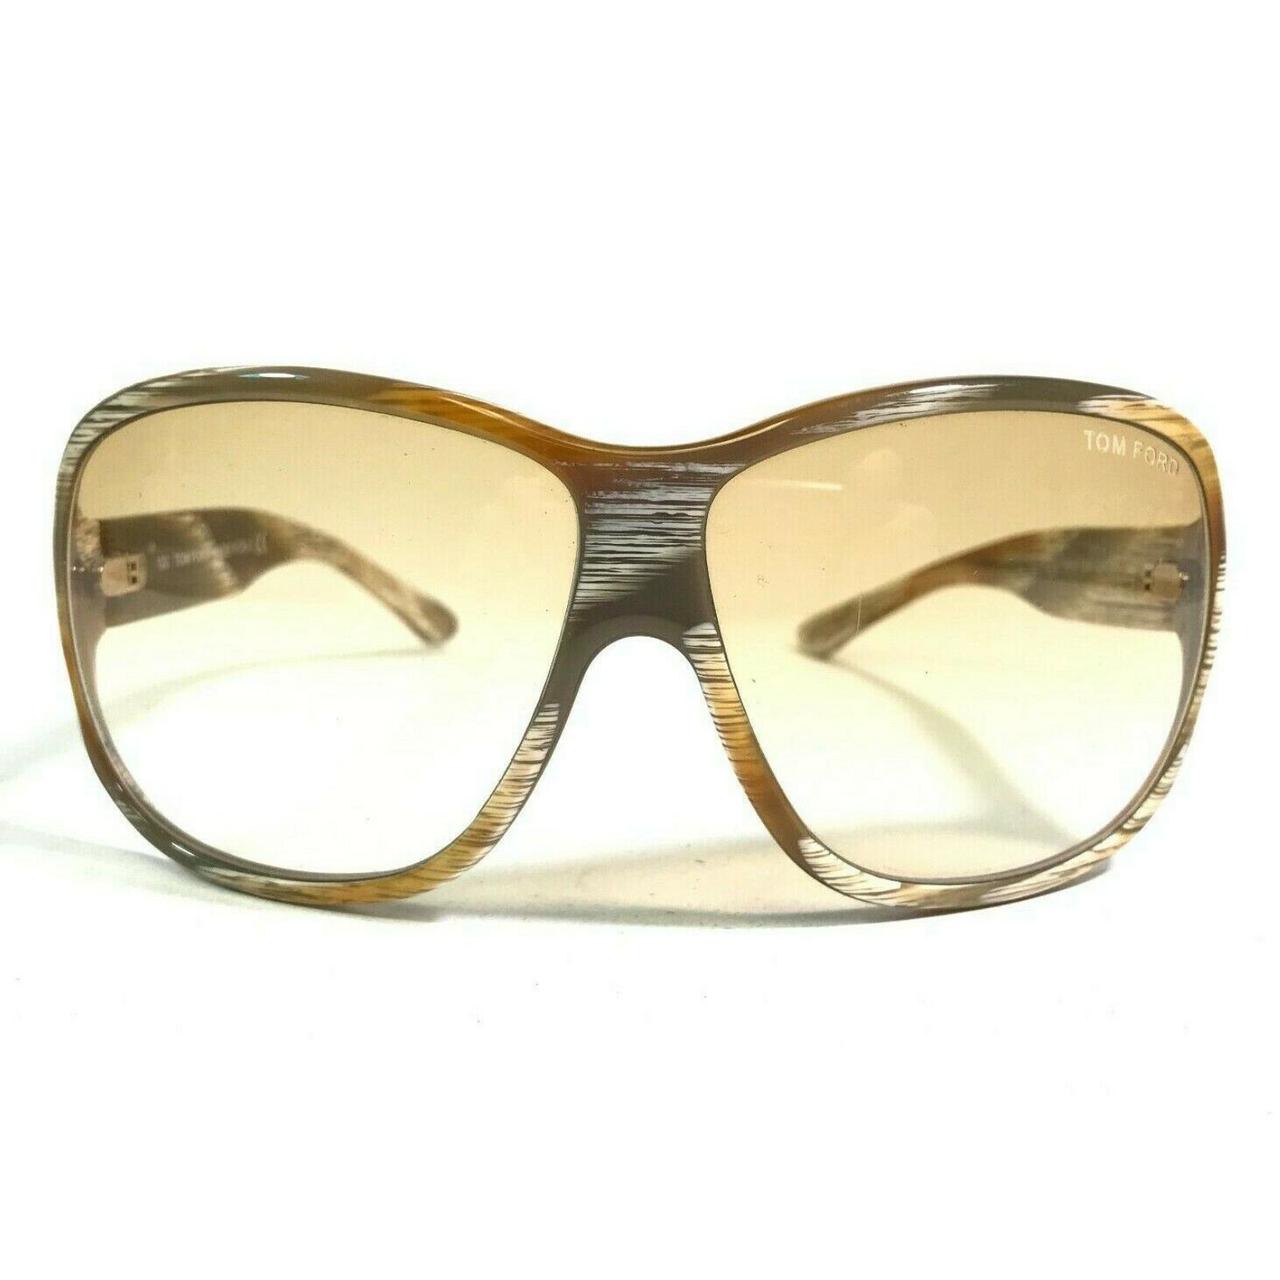 TOM FORD Women's White and Brown Sunglasses